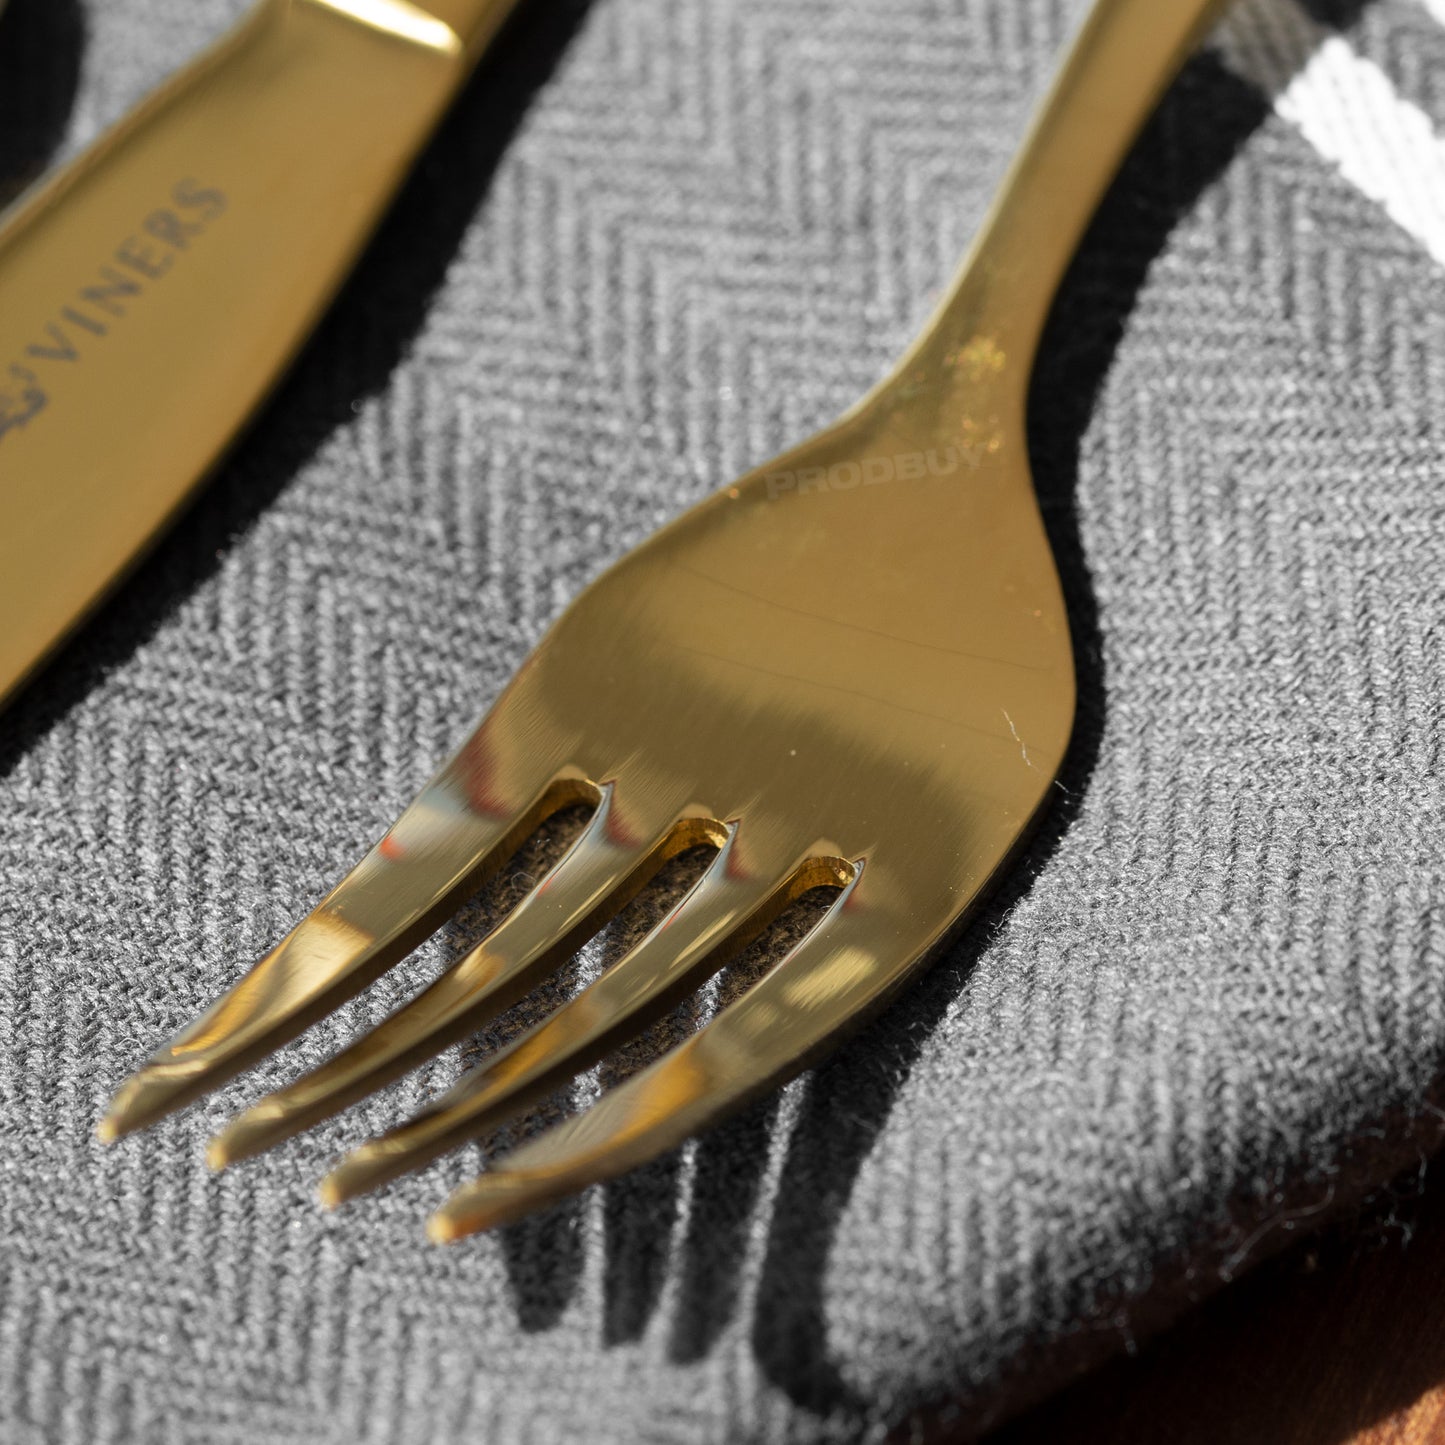 Viners 16 Piece Gold Colour Stainless Steel Cutlery Set